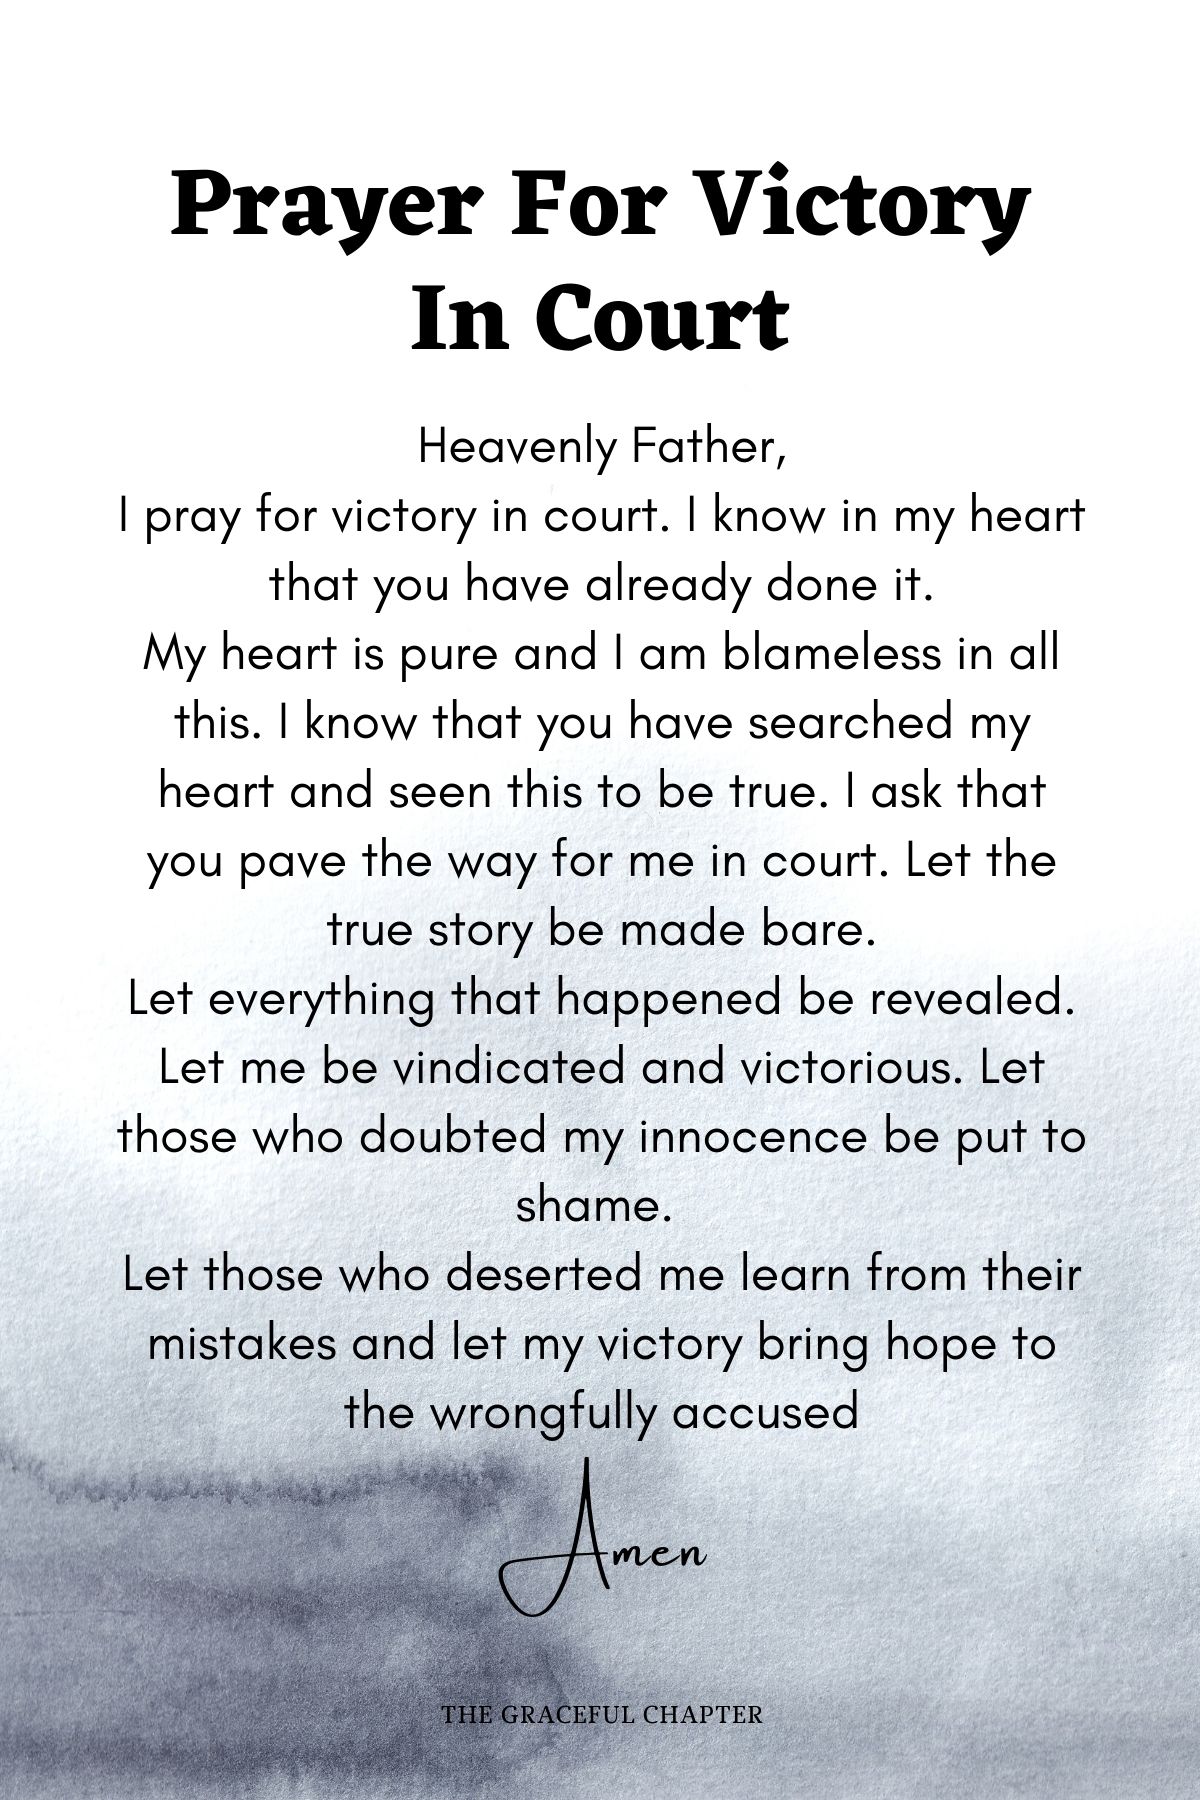 Prayer for victory in court